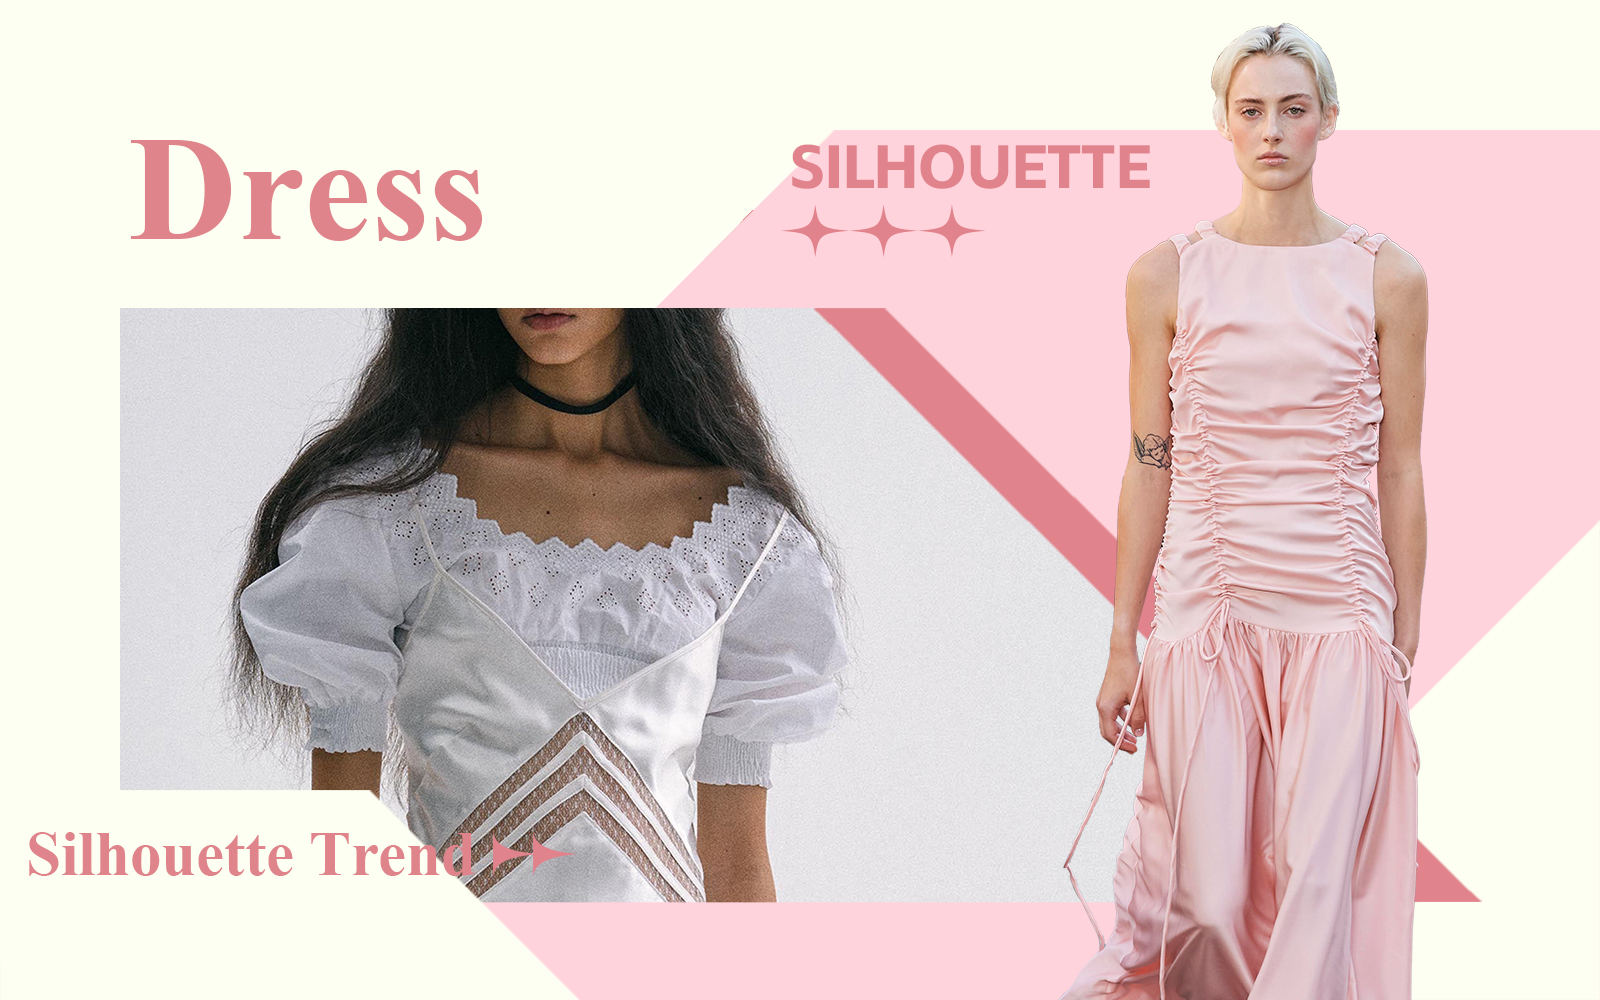 French Romance -- The Silhouette Trend for Women's Dress